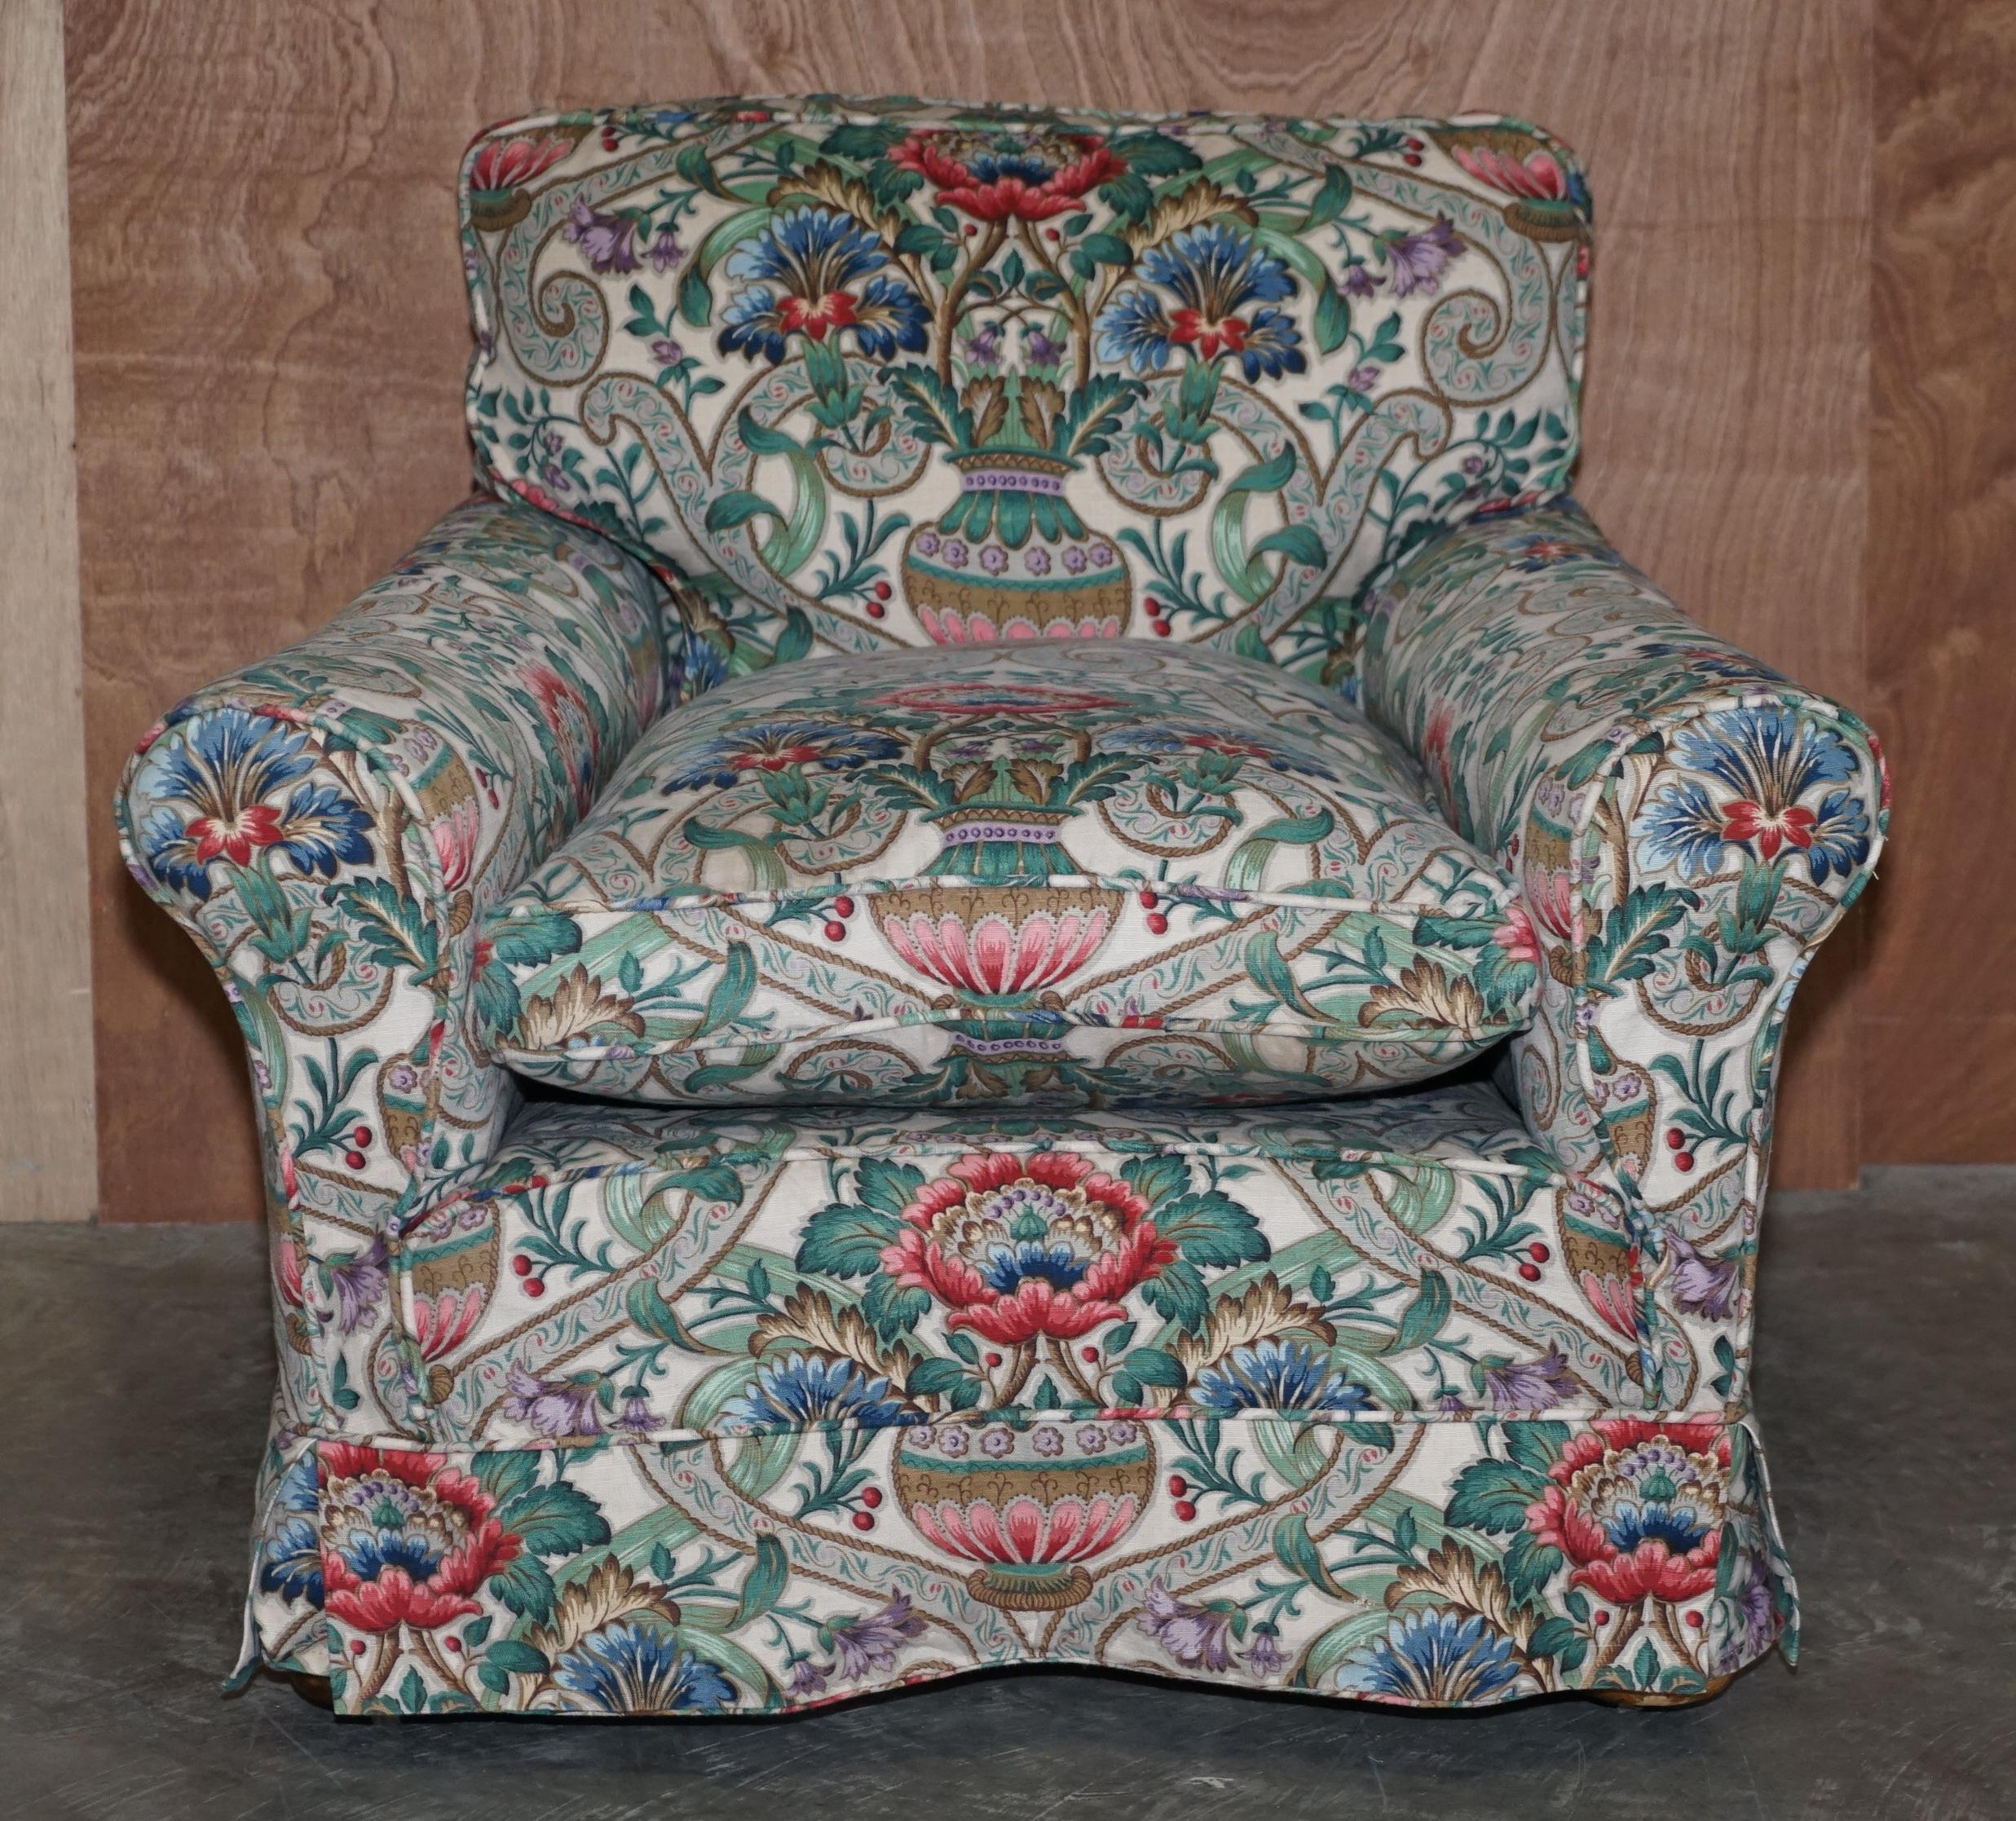 We are delighted to offer this lovely late Victorian circa 1900 club armchair with stunning Chinz style embroidered upholstery

A very good looking and well made armchair, it’s a long platform club armchair so this piece you really sink into. The